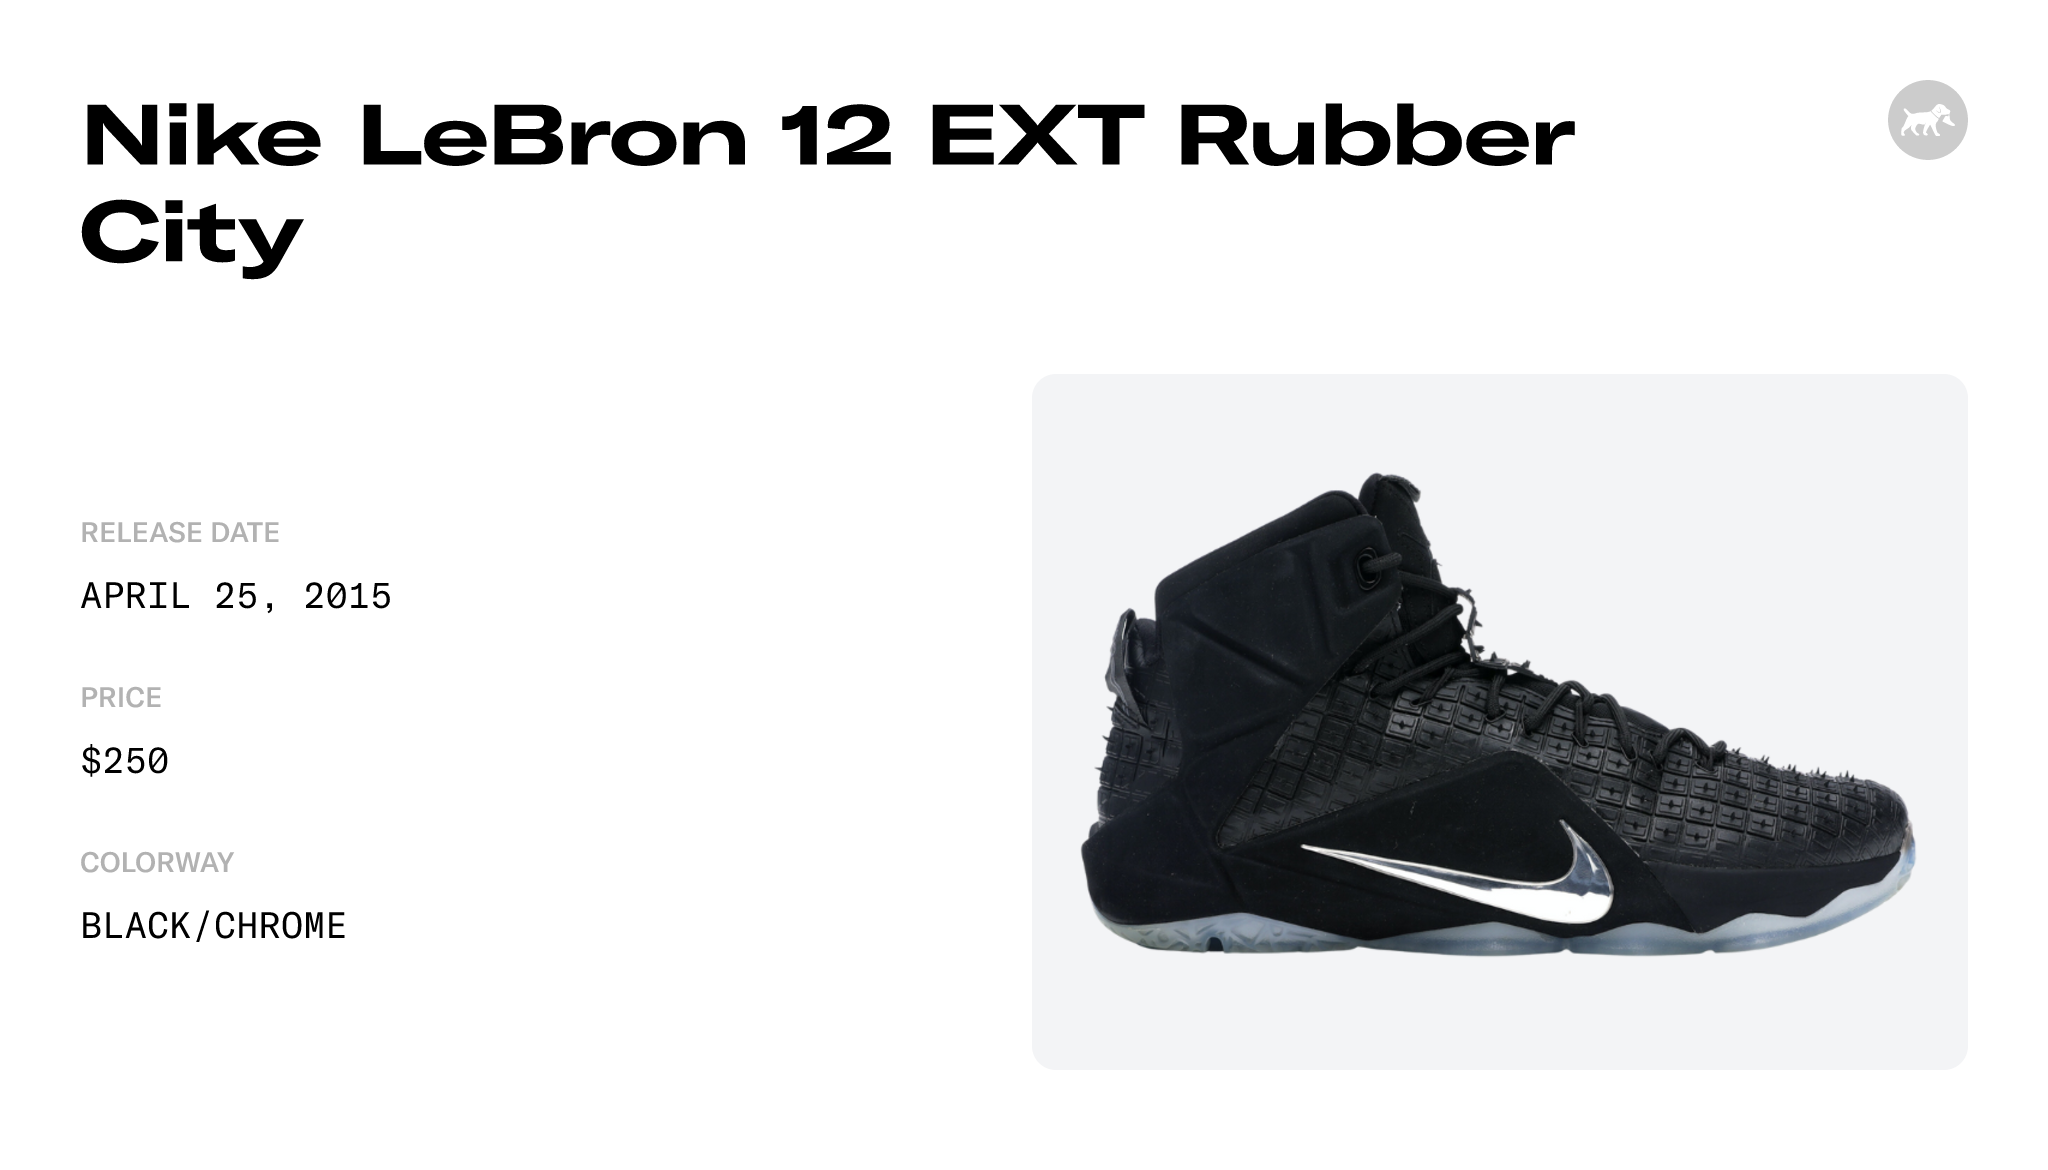 Nike LeBron 12 EXT Rubber City - 744286-001 Raffles and Release Date